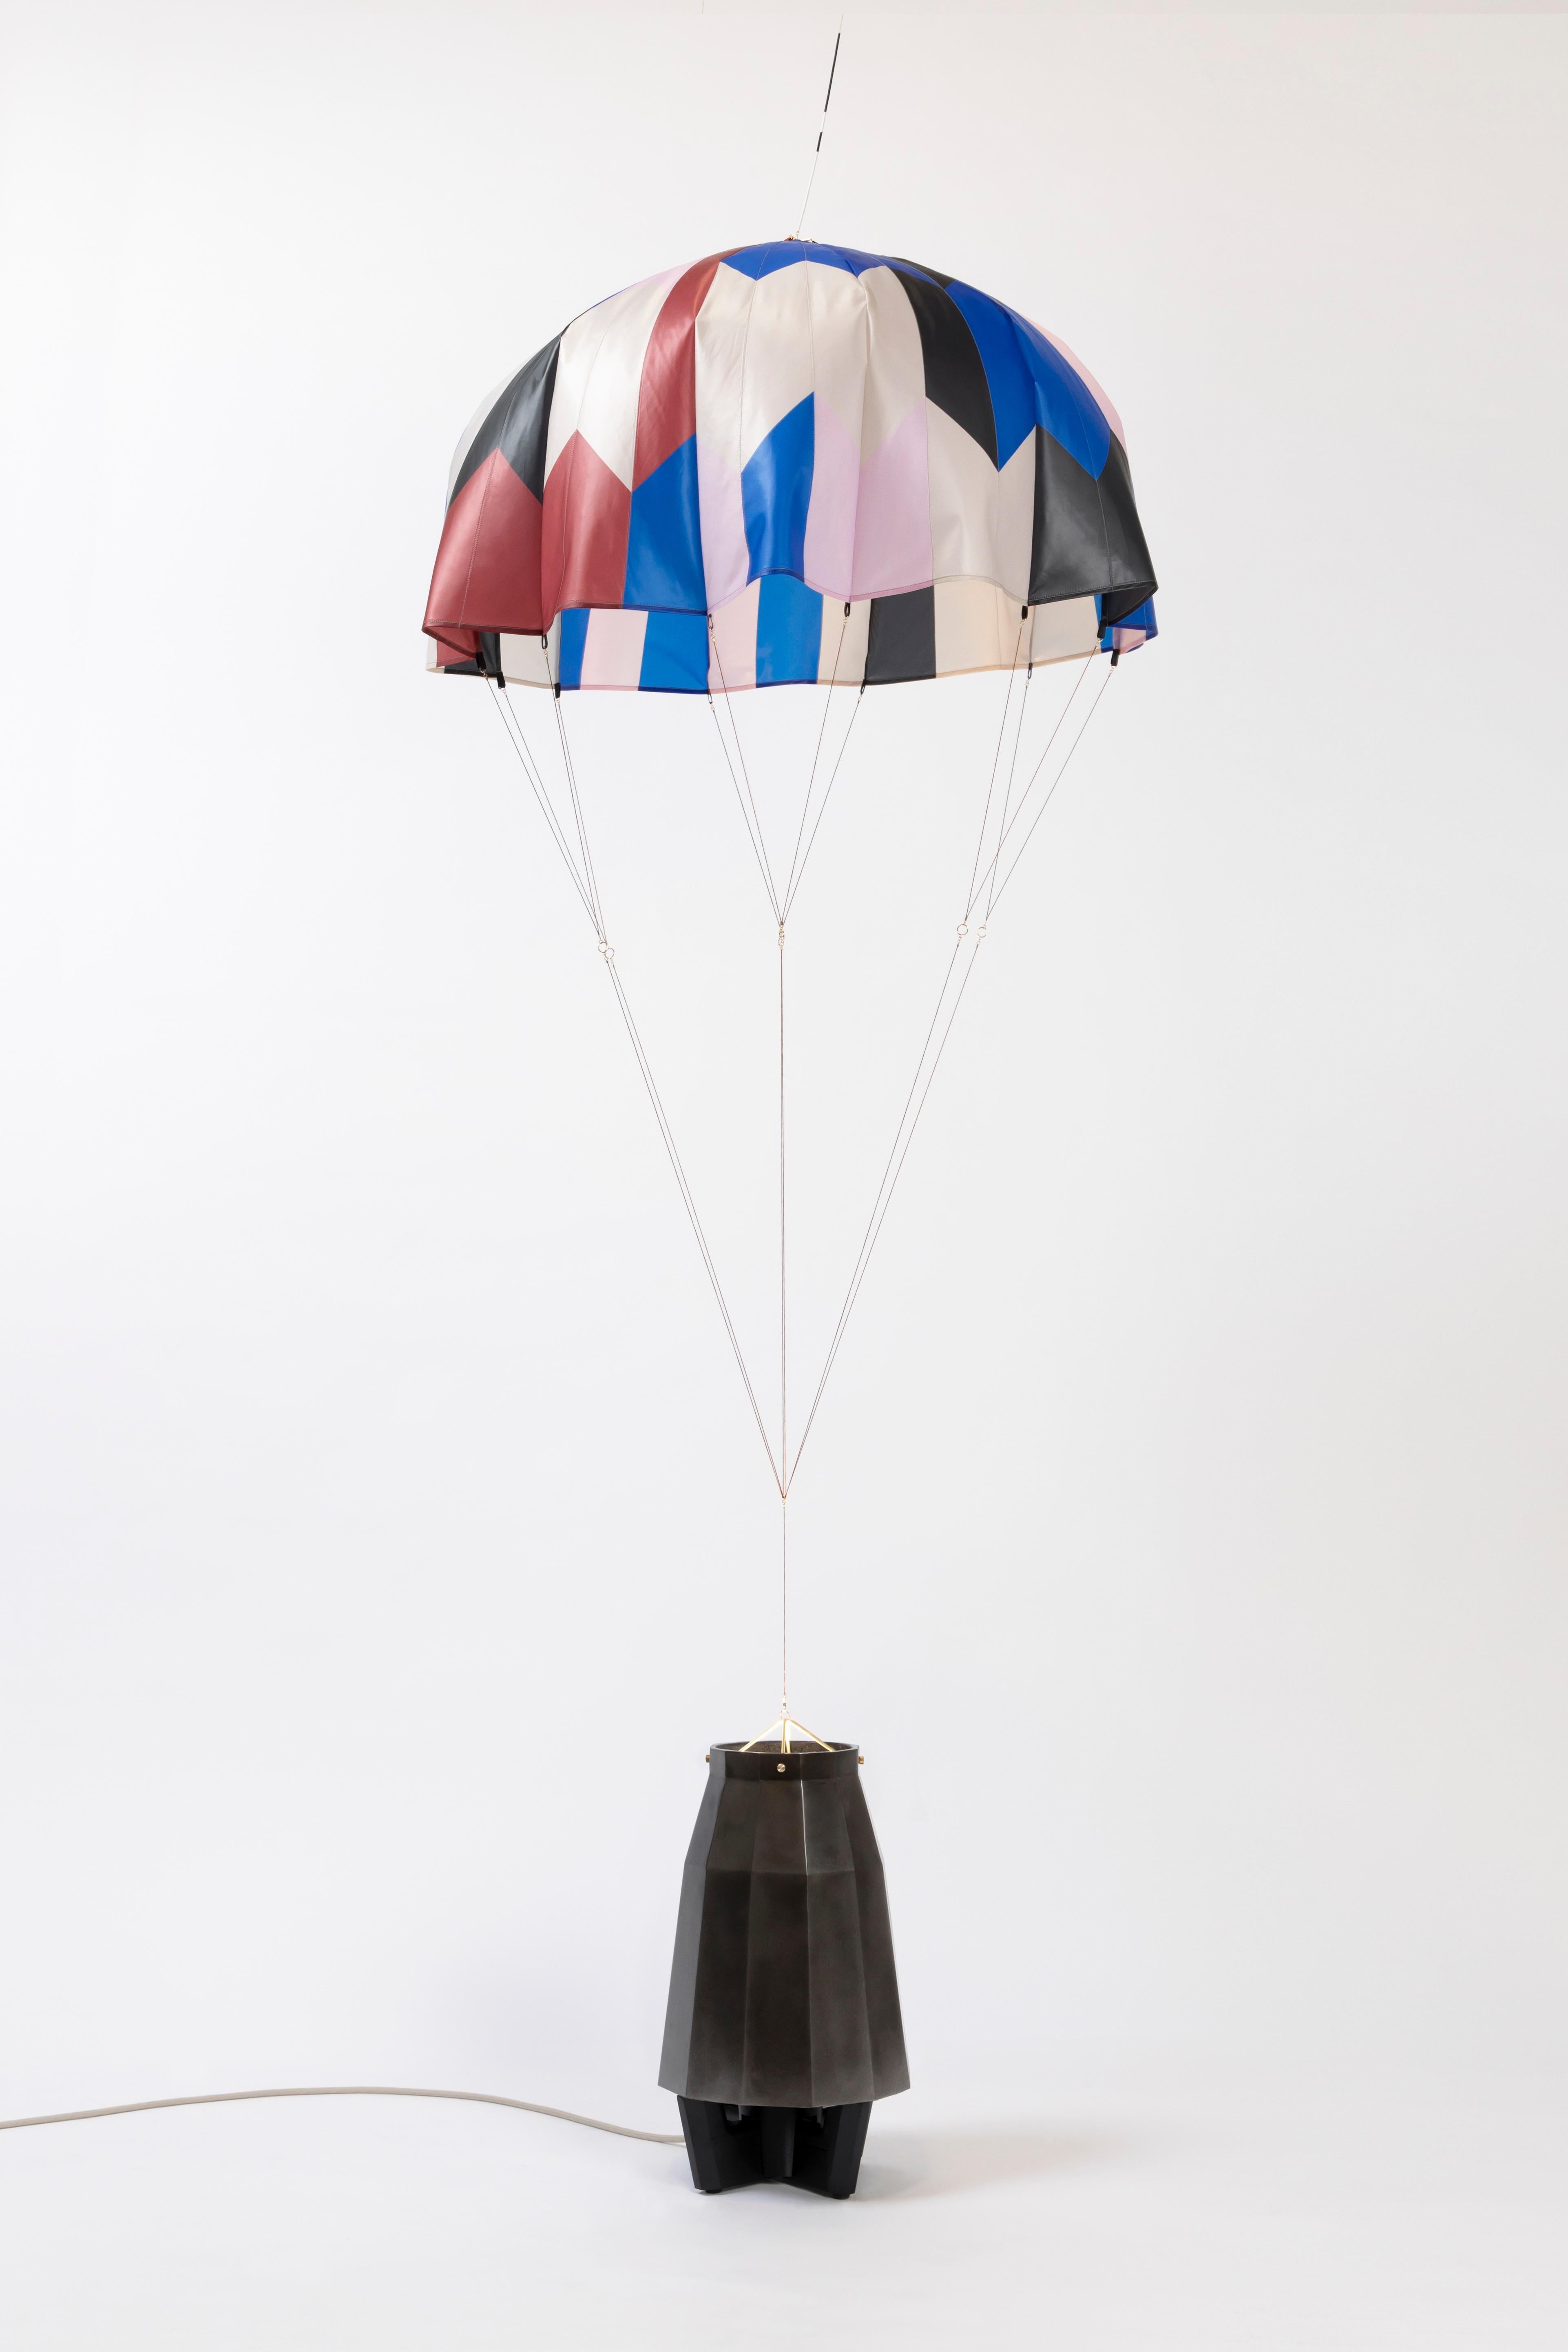 From acclaimed lighting designer Bec Brittain, a new series of dynamic, whimsical lighting forms that mimic the rhythm of flowers in the wind.

Taking cues from the movement of inflated parachutes – specifically, those used by NASA during wind